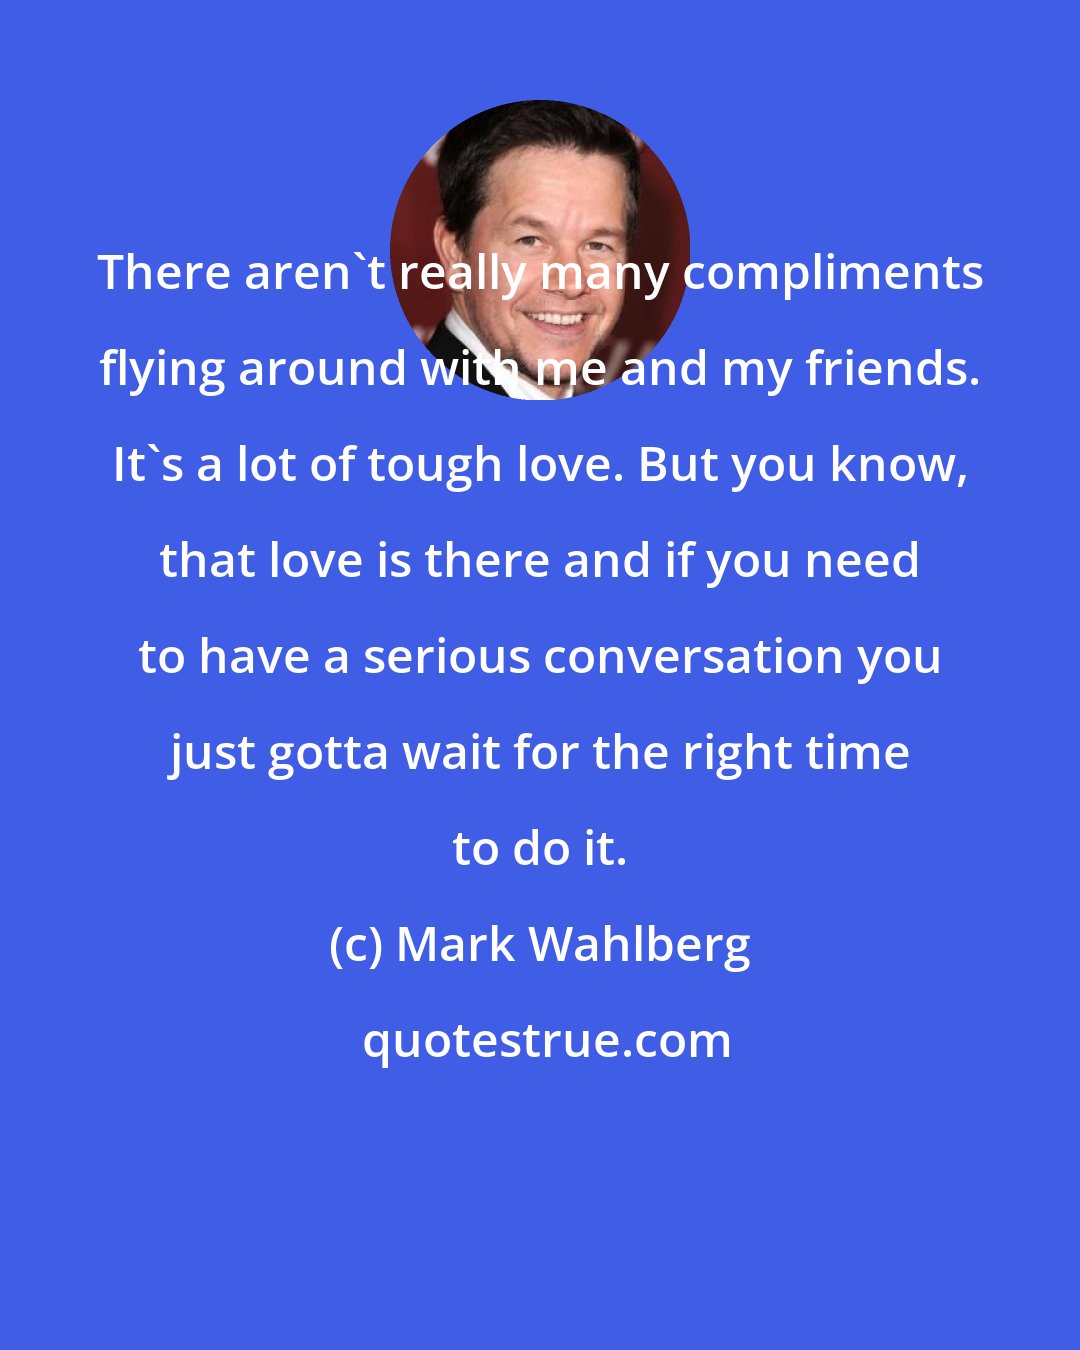 Mark Wahlberg: There aren't really many compliments flying around with me and my friends. It's a lot of tough love. But you know, that love is there and if you need to have a serious conversation you just gotta wait for the right time to do it.